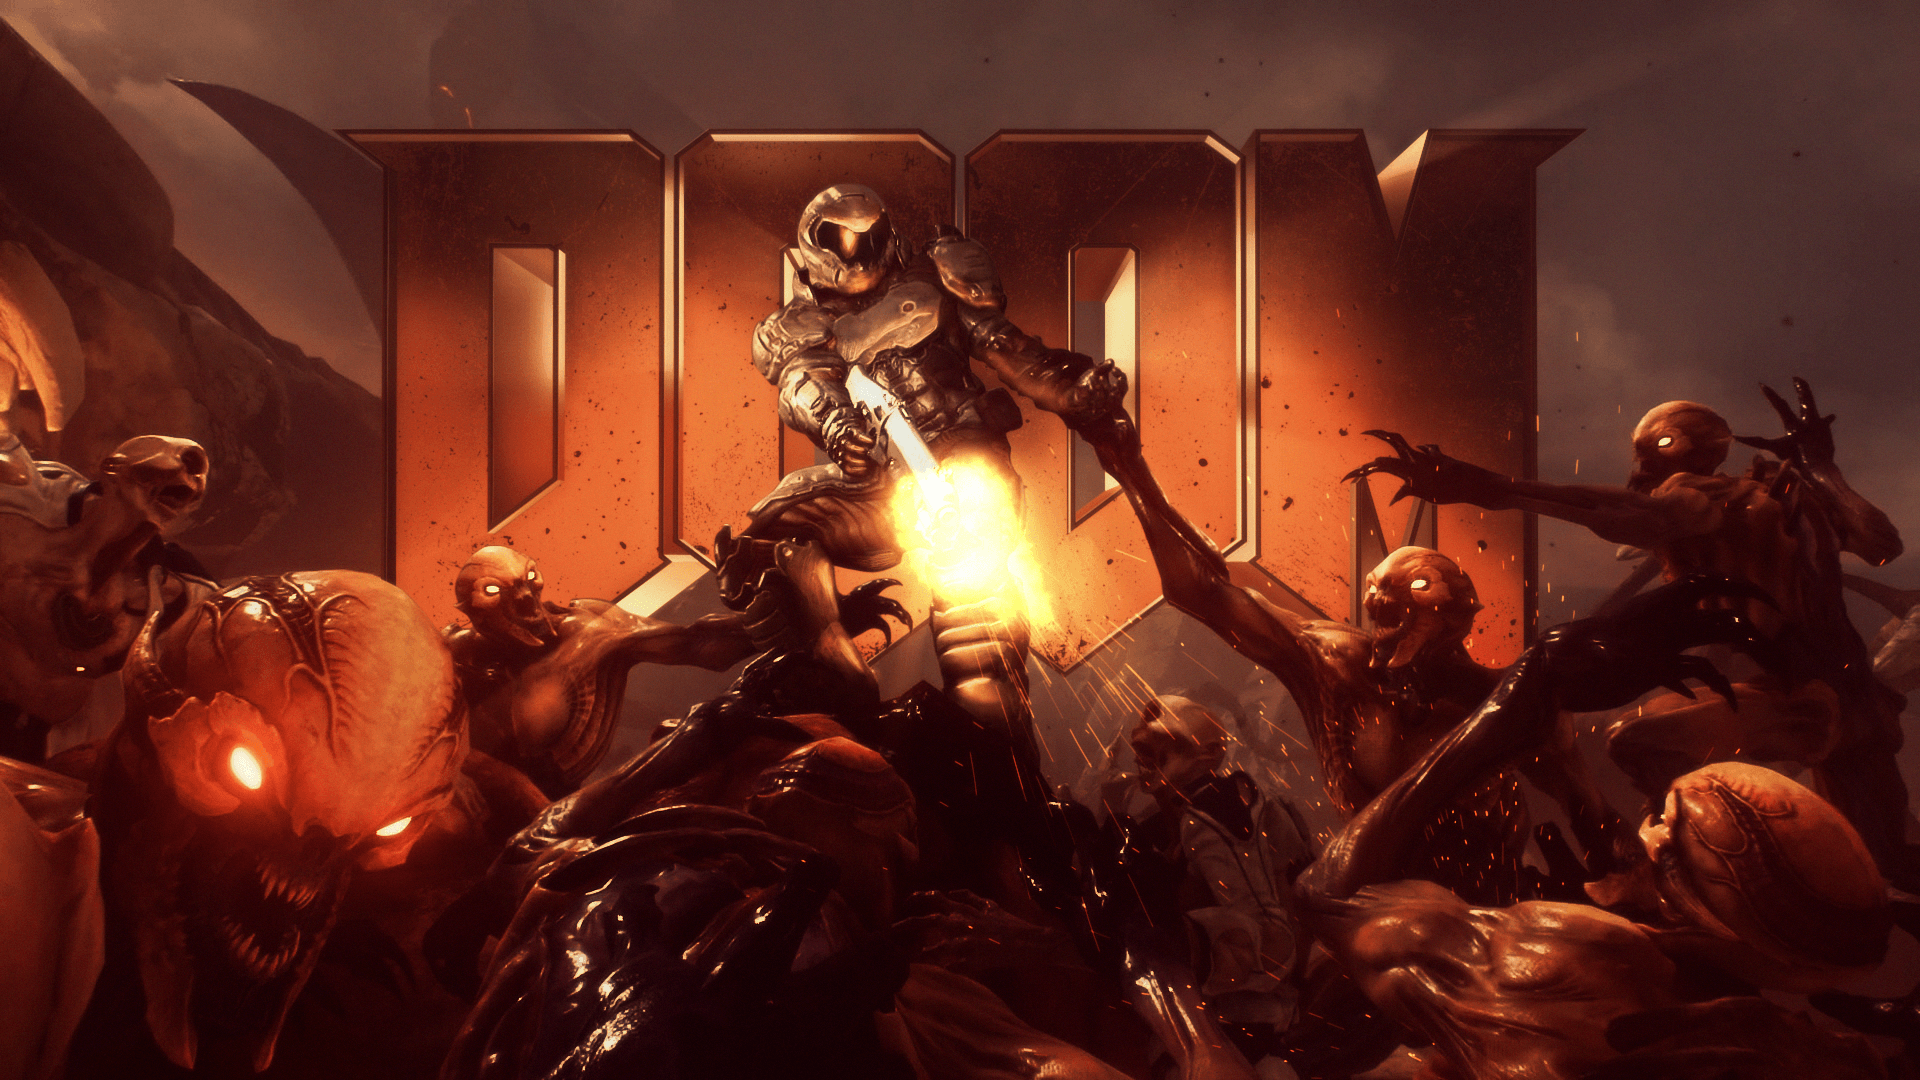 The original DOOM cover art, done with the new game's assets